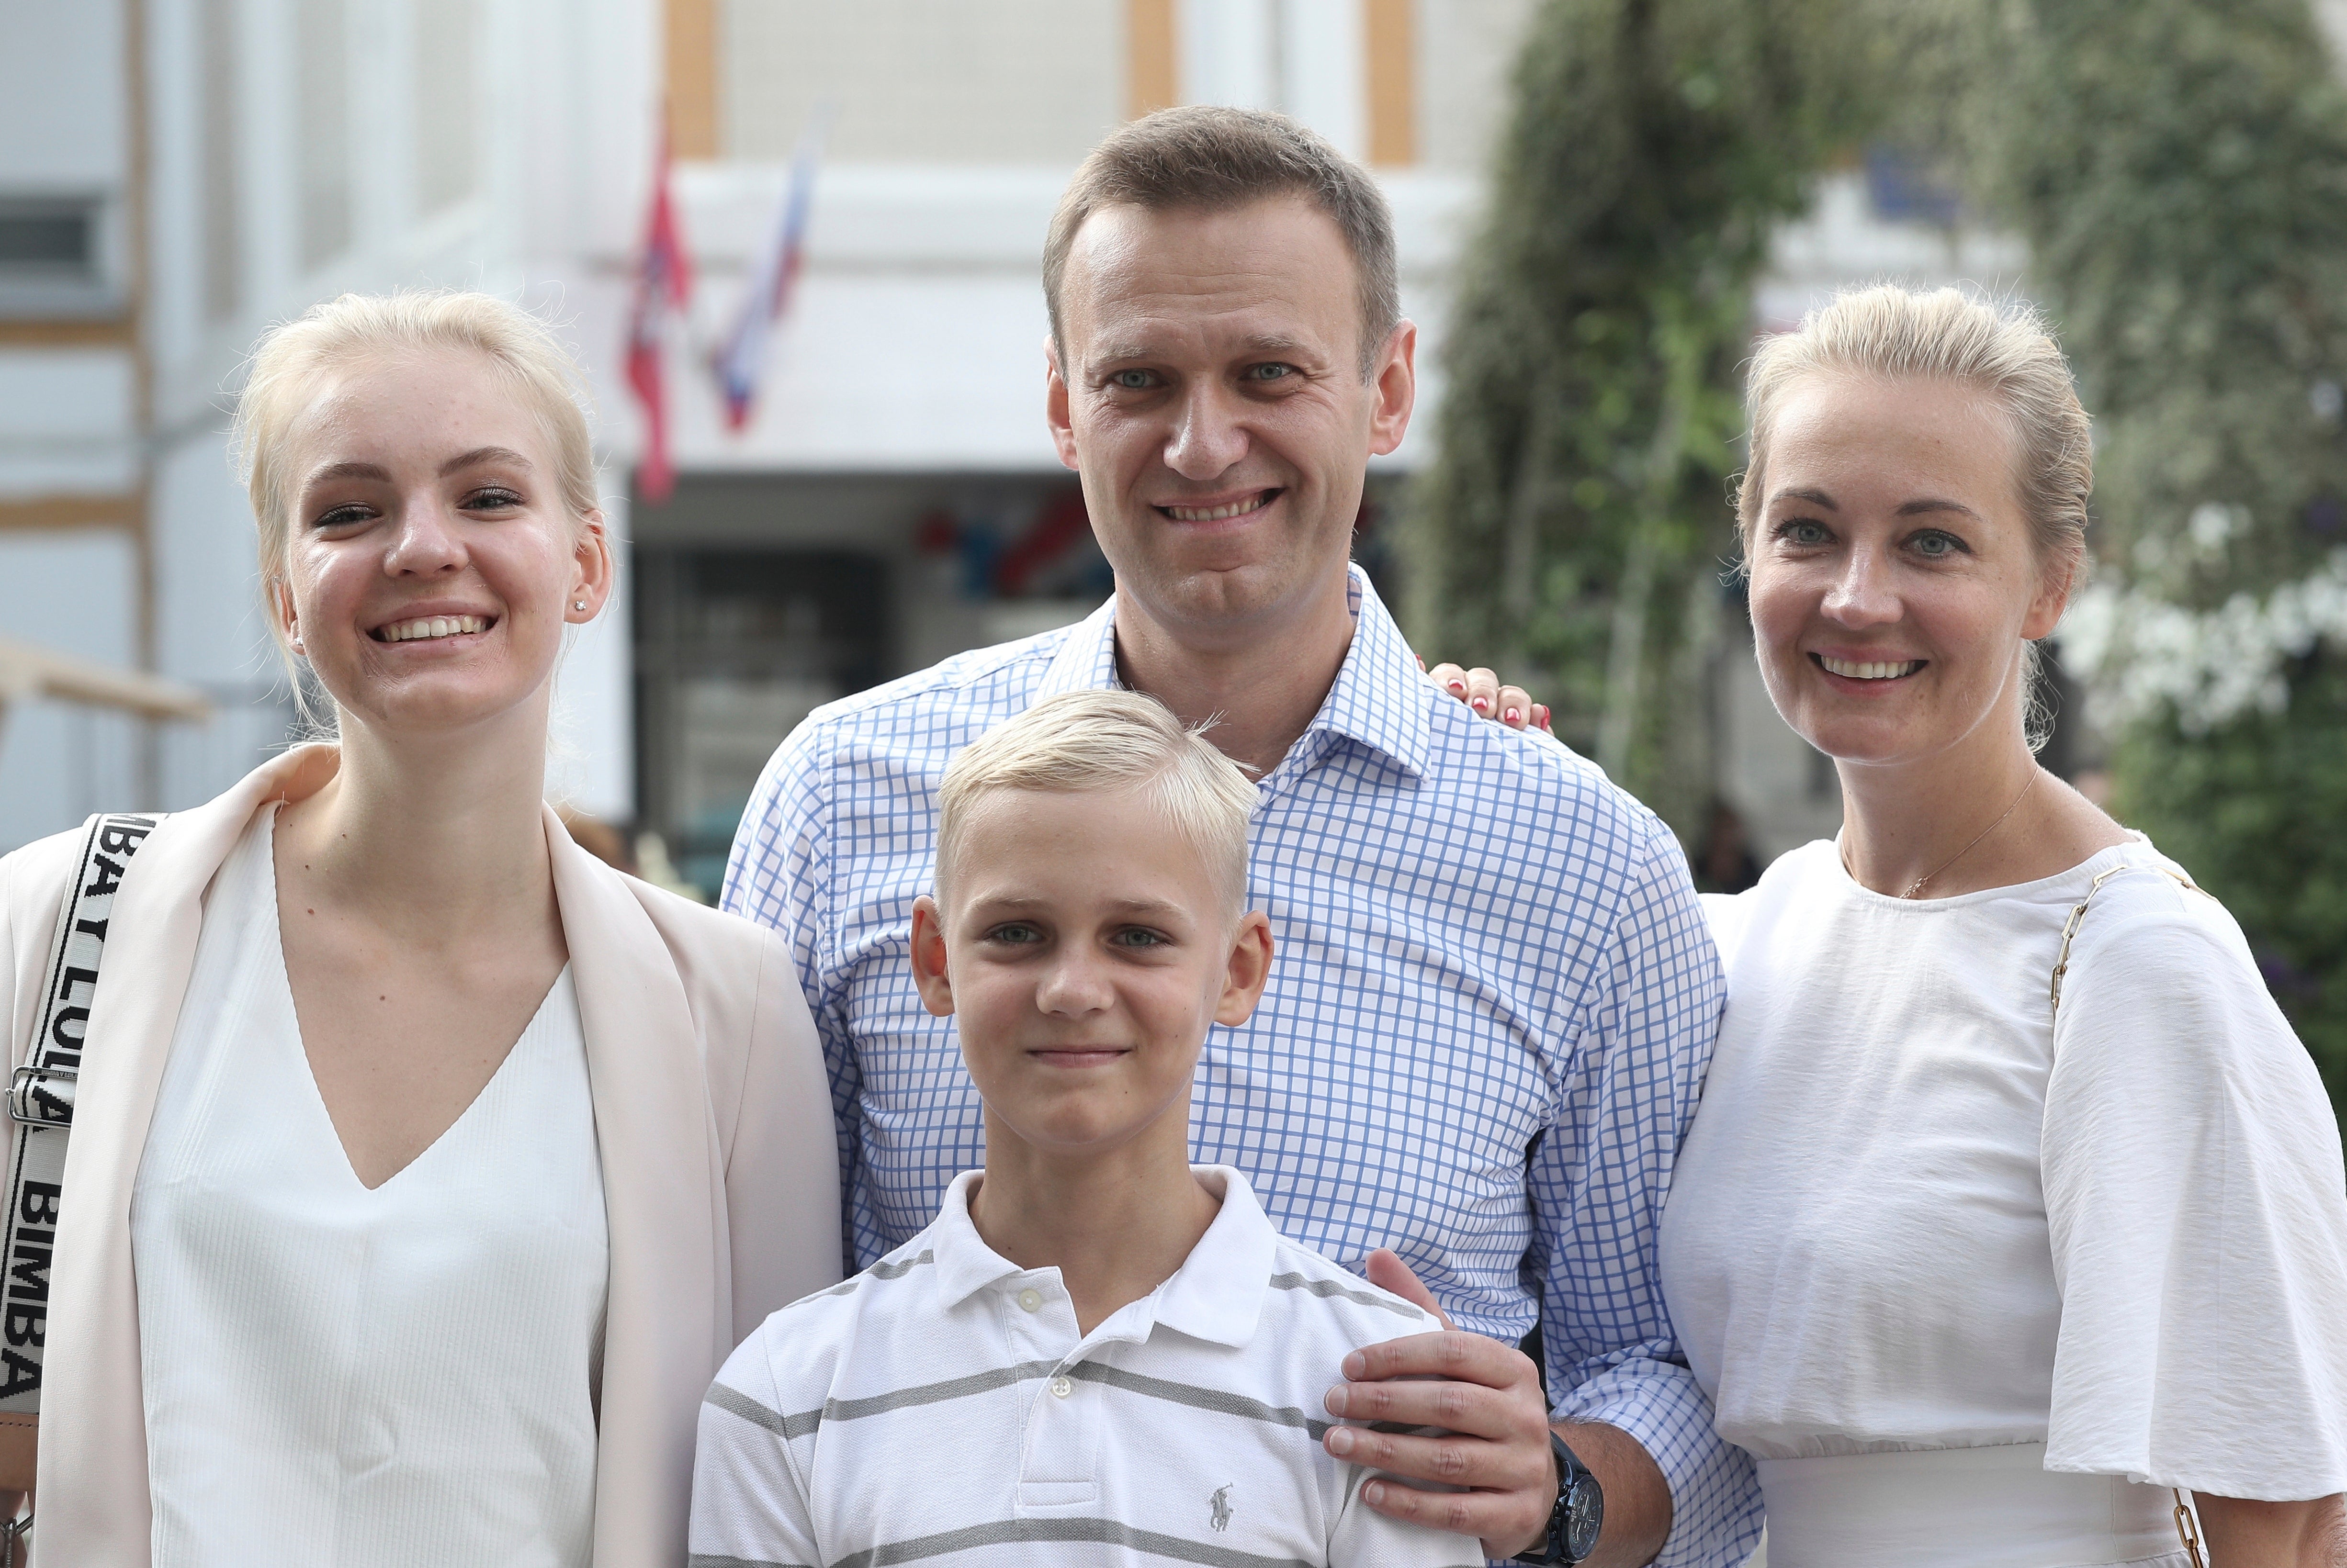 Russian opposition leader Alexei Navalny, with his wife Yulia, right, daughter Daria, and son Zakha in 2019